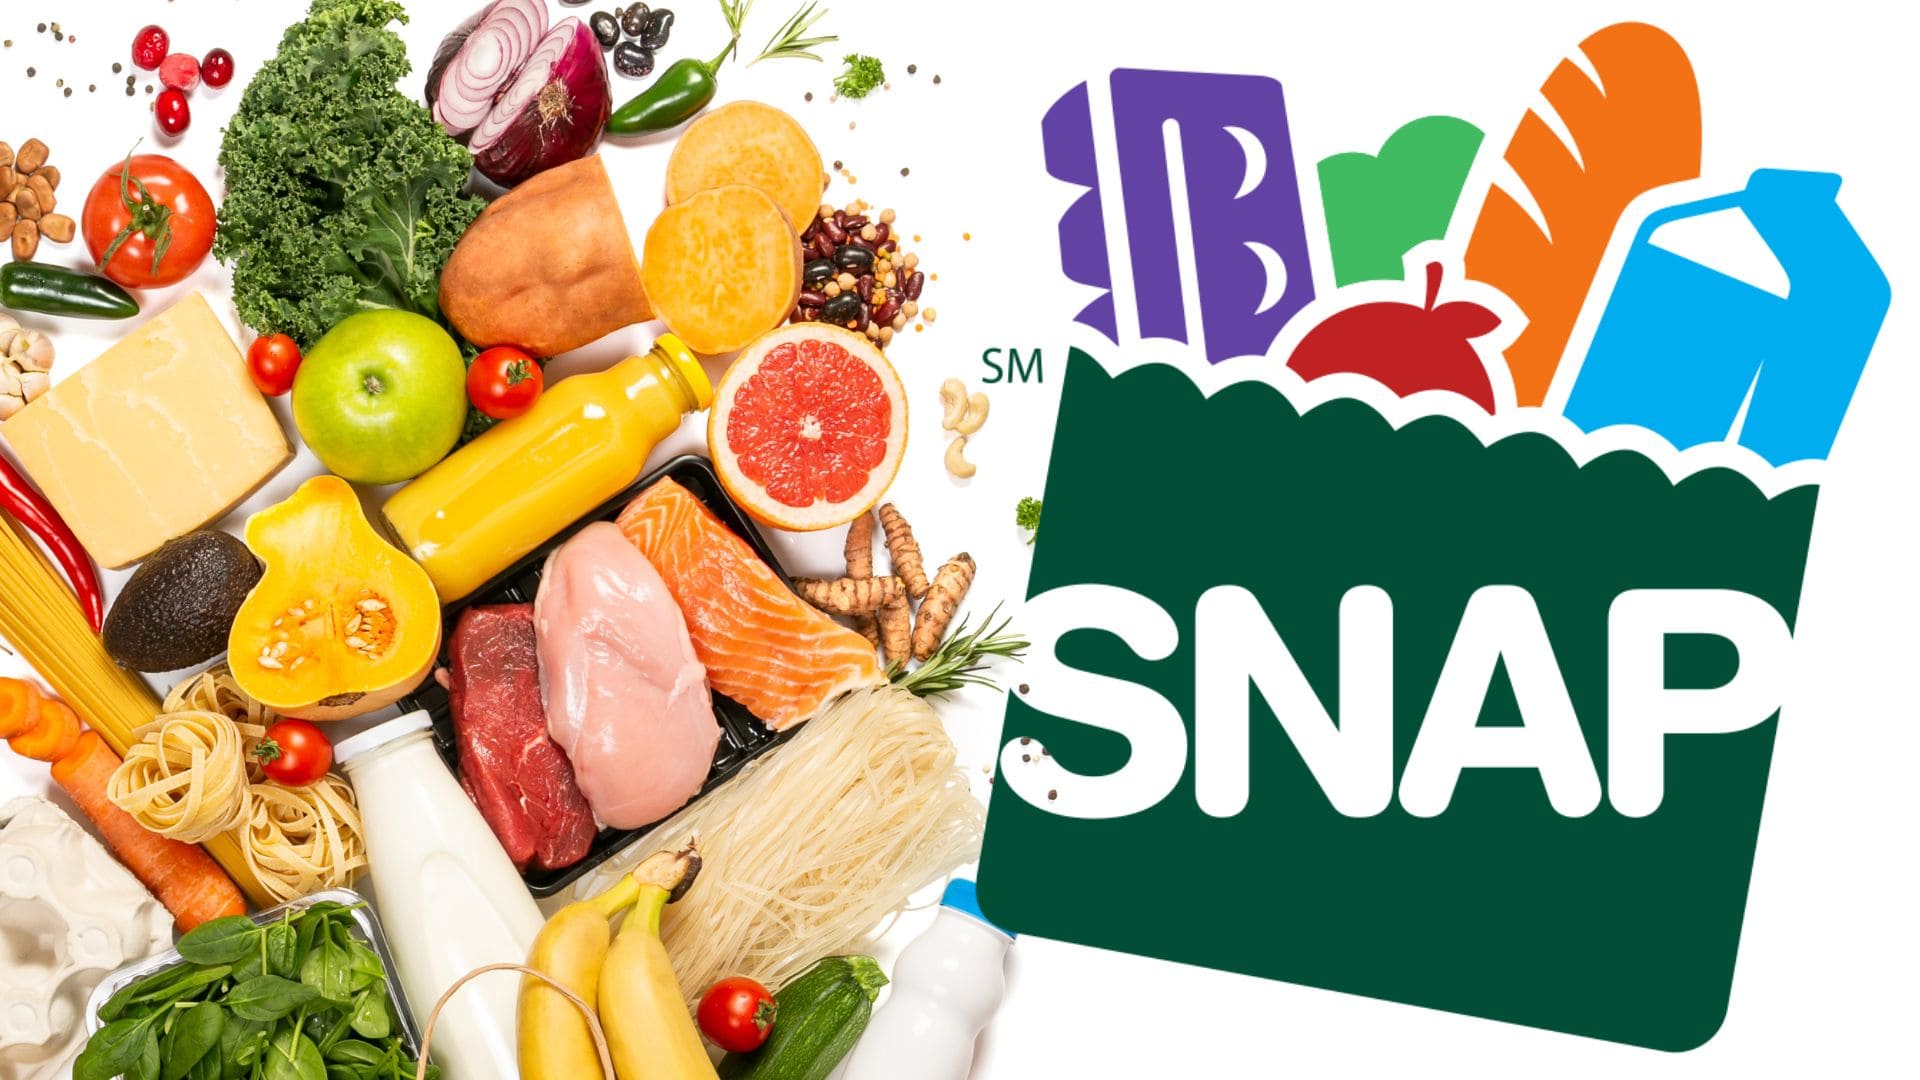 SNAP Food Stamps will arrive in some States soon